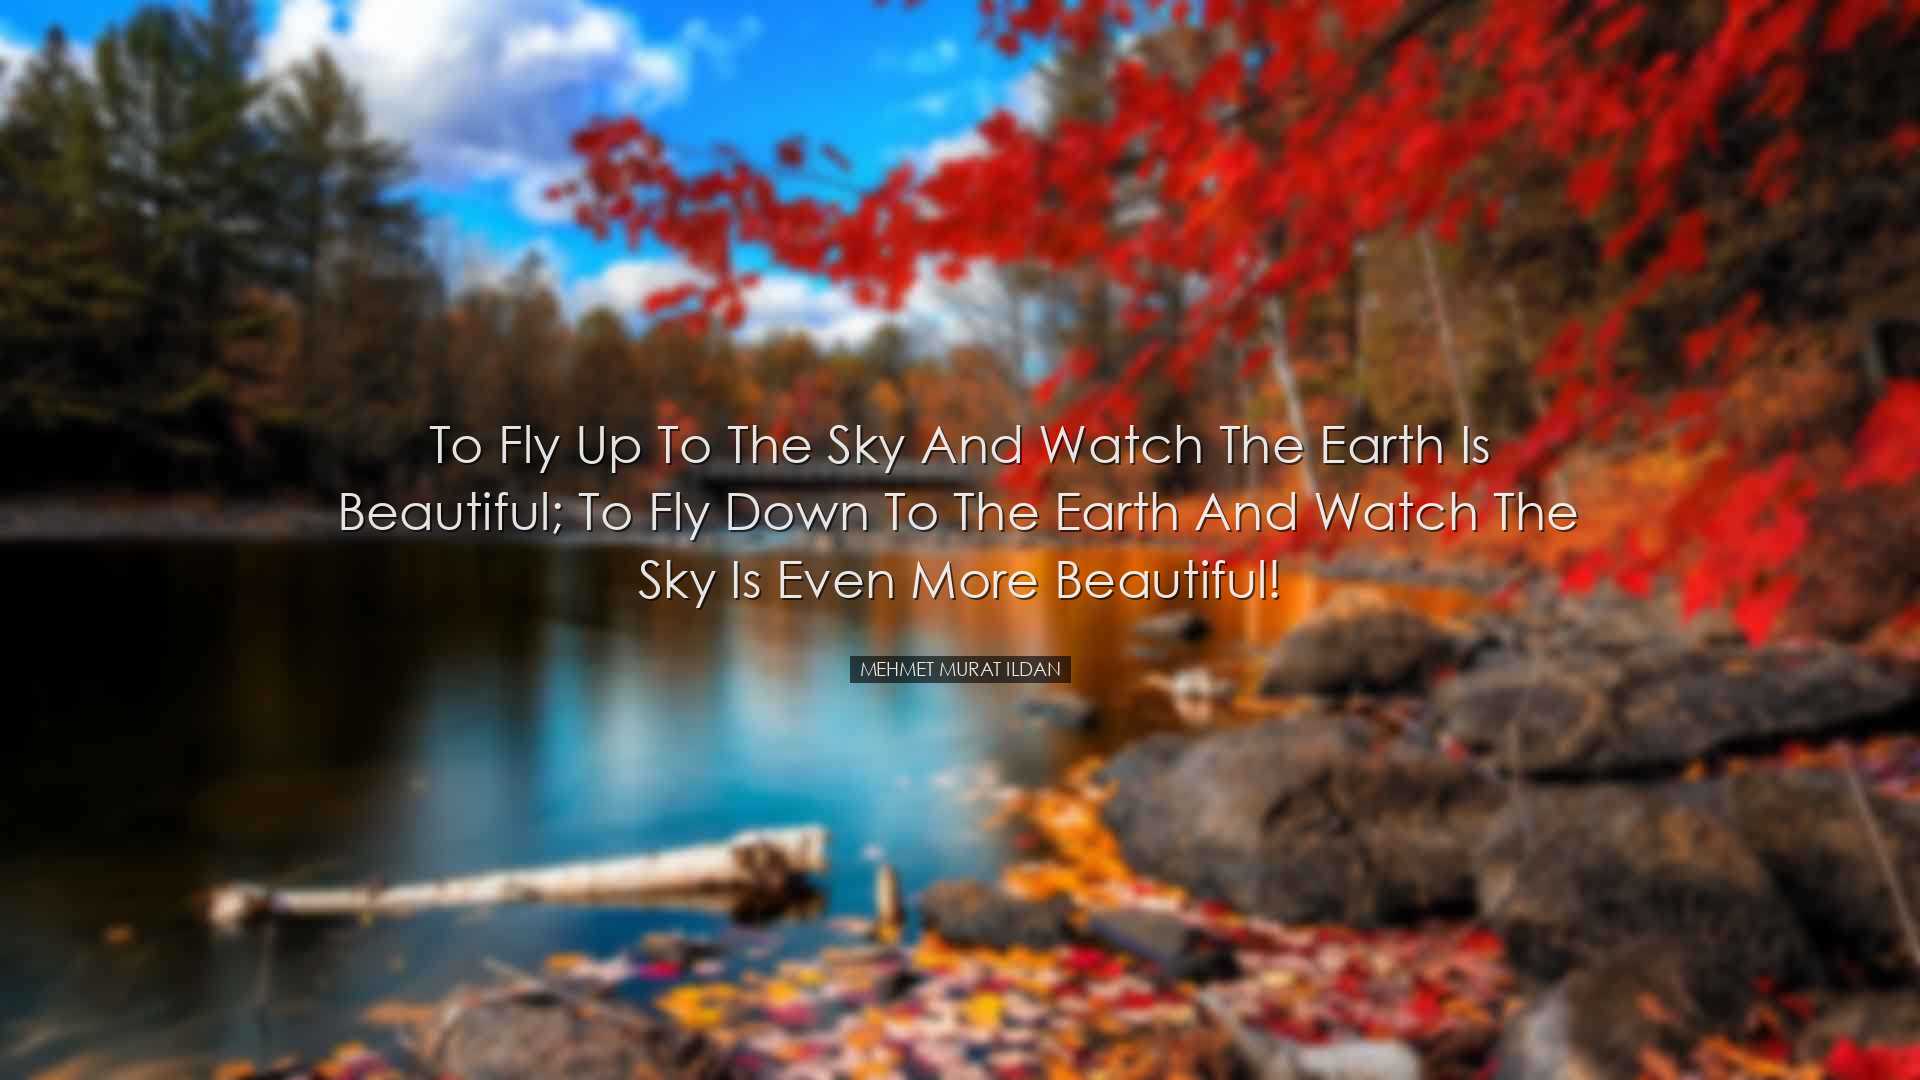 To fly up to the sky and watch the earth is beautiful; to fly down